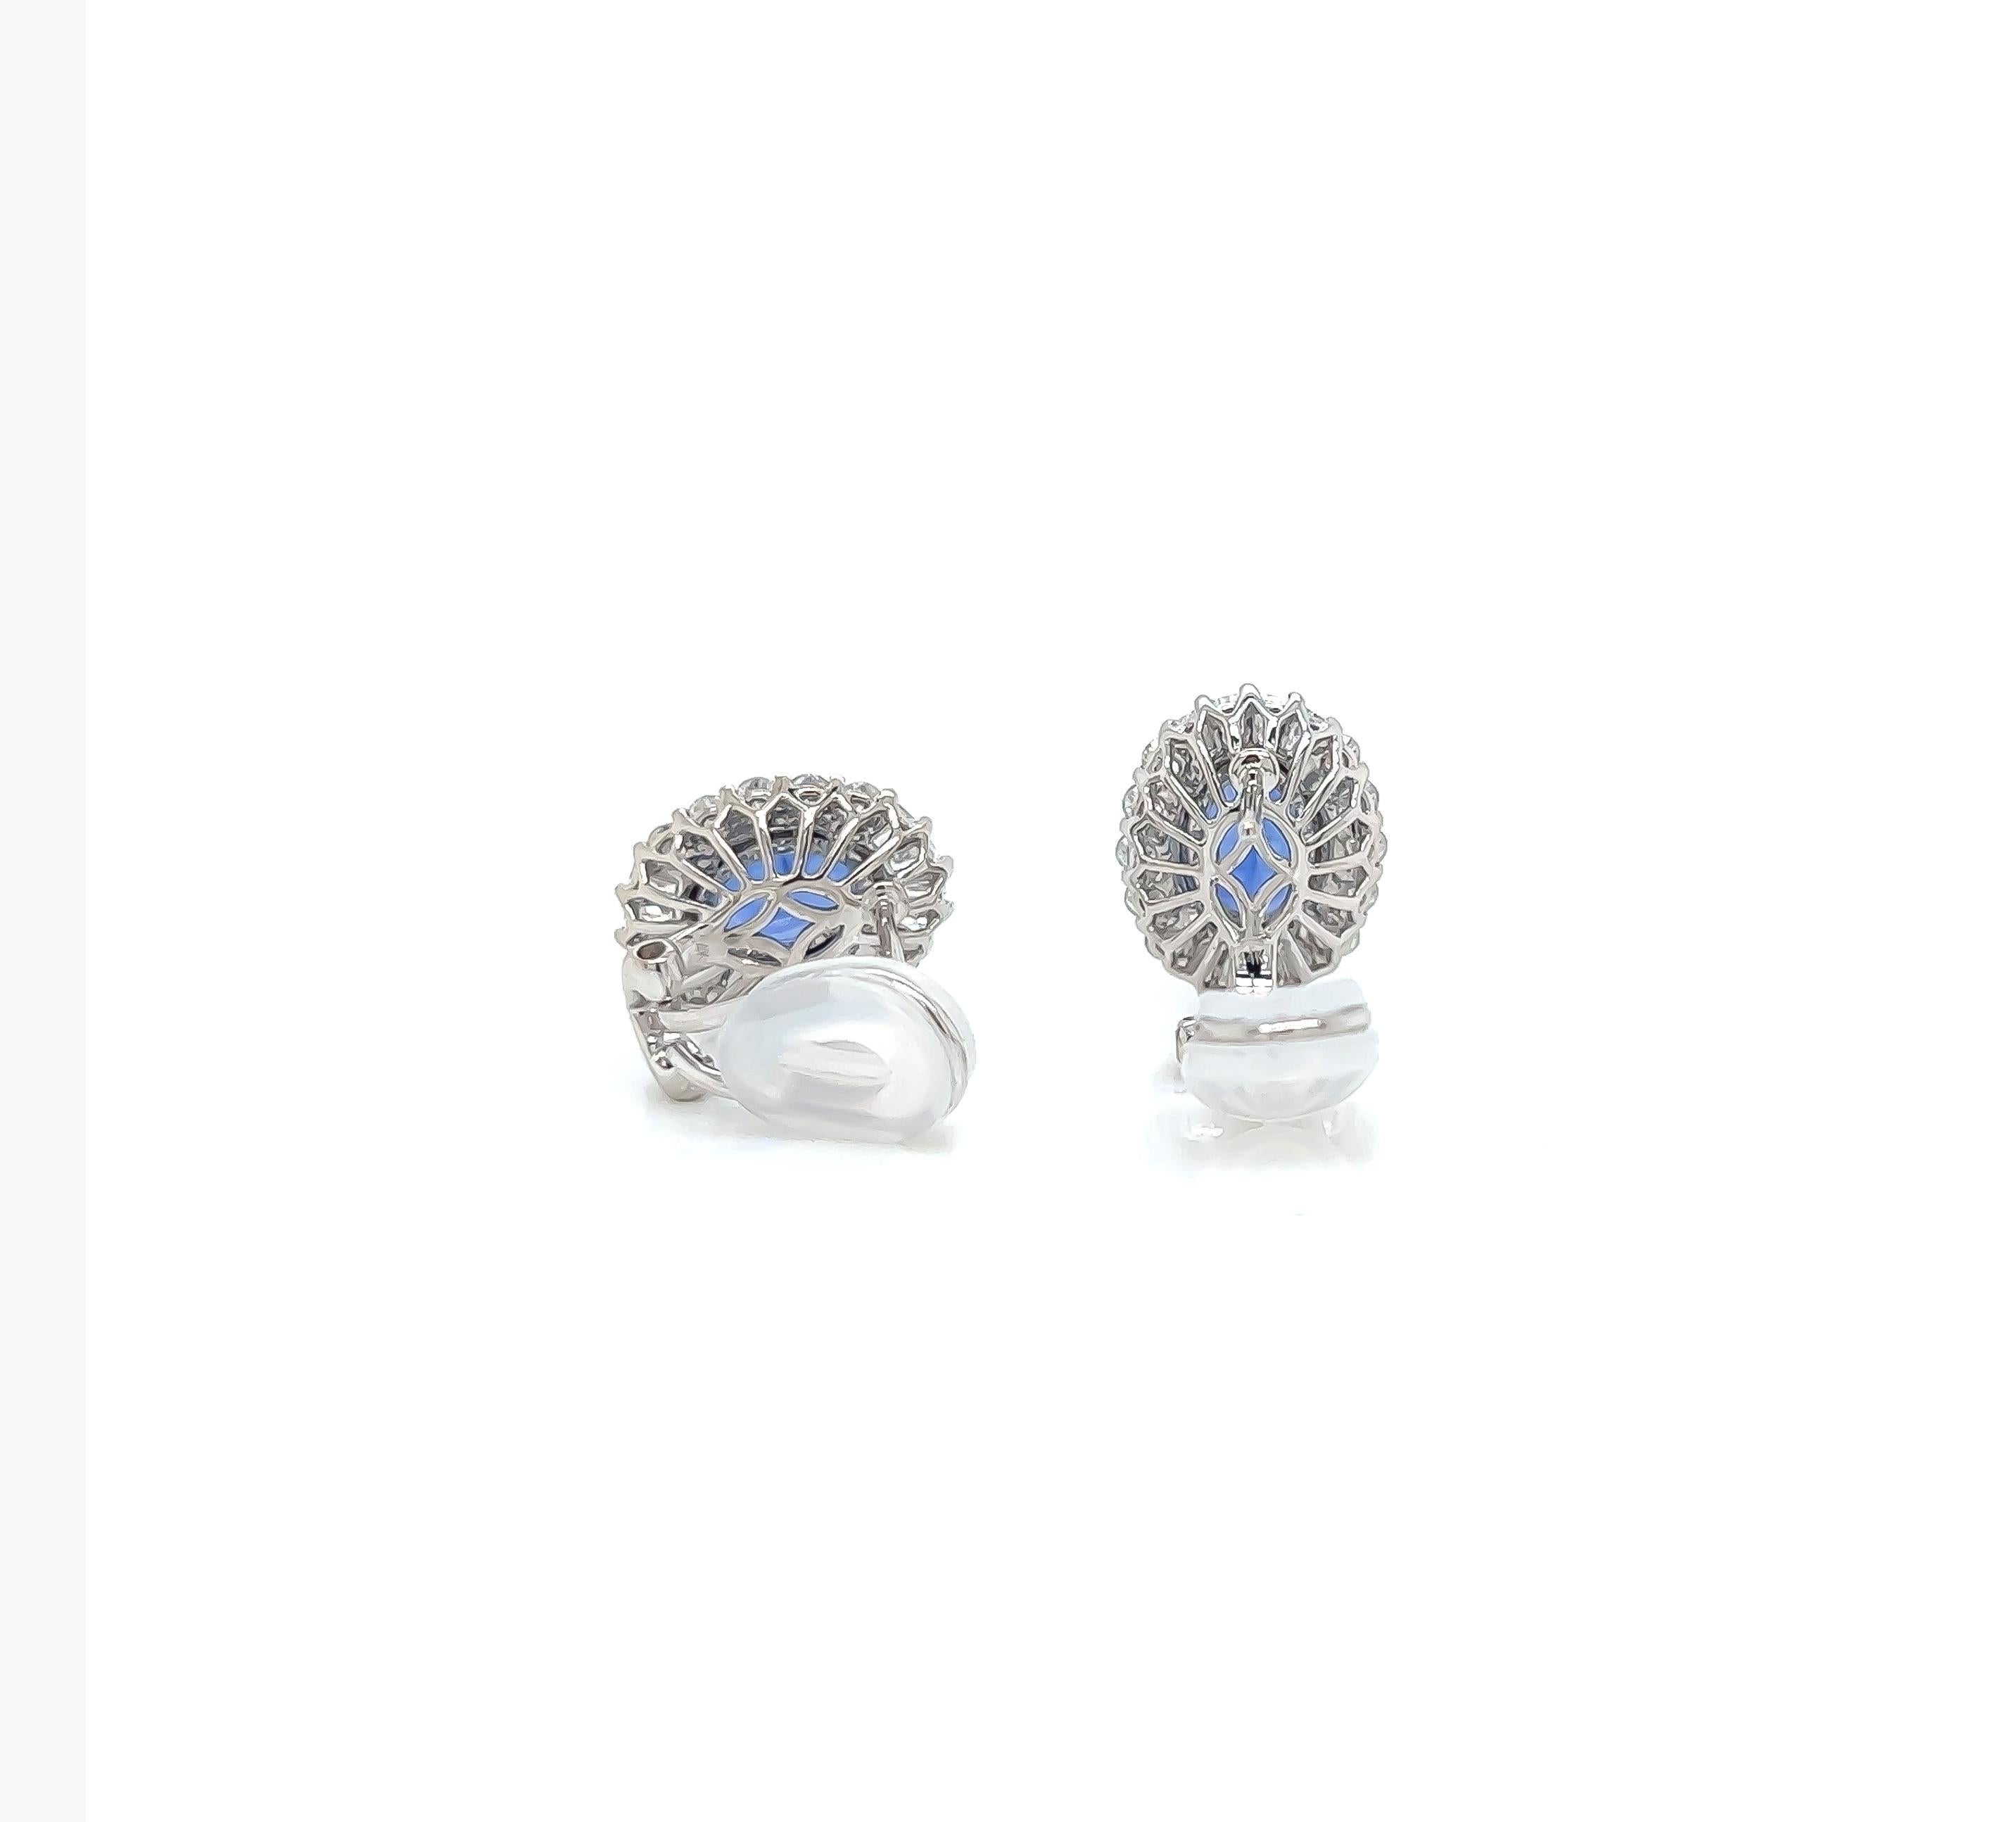 Oval Cut 4.14 Total Carat Sapphire and Diamond Earrings in 14K White Gold For Sale